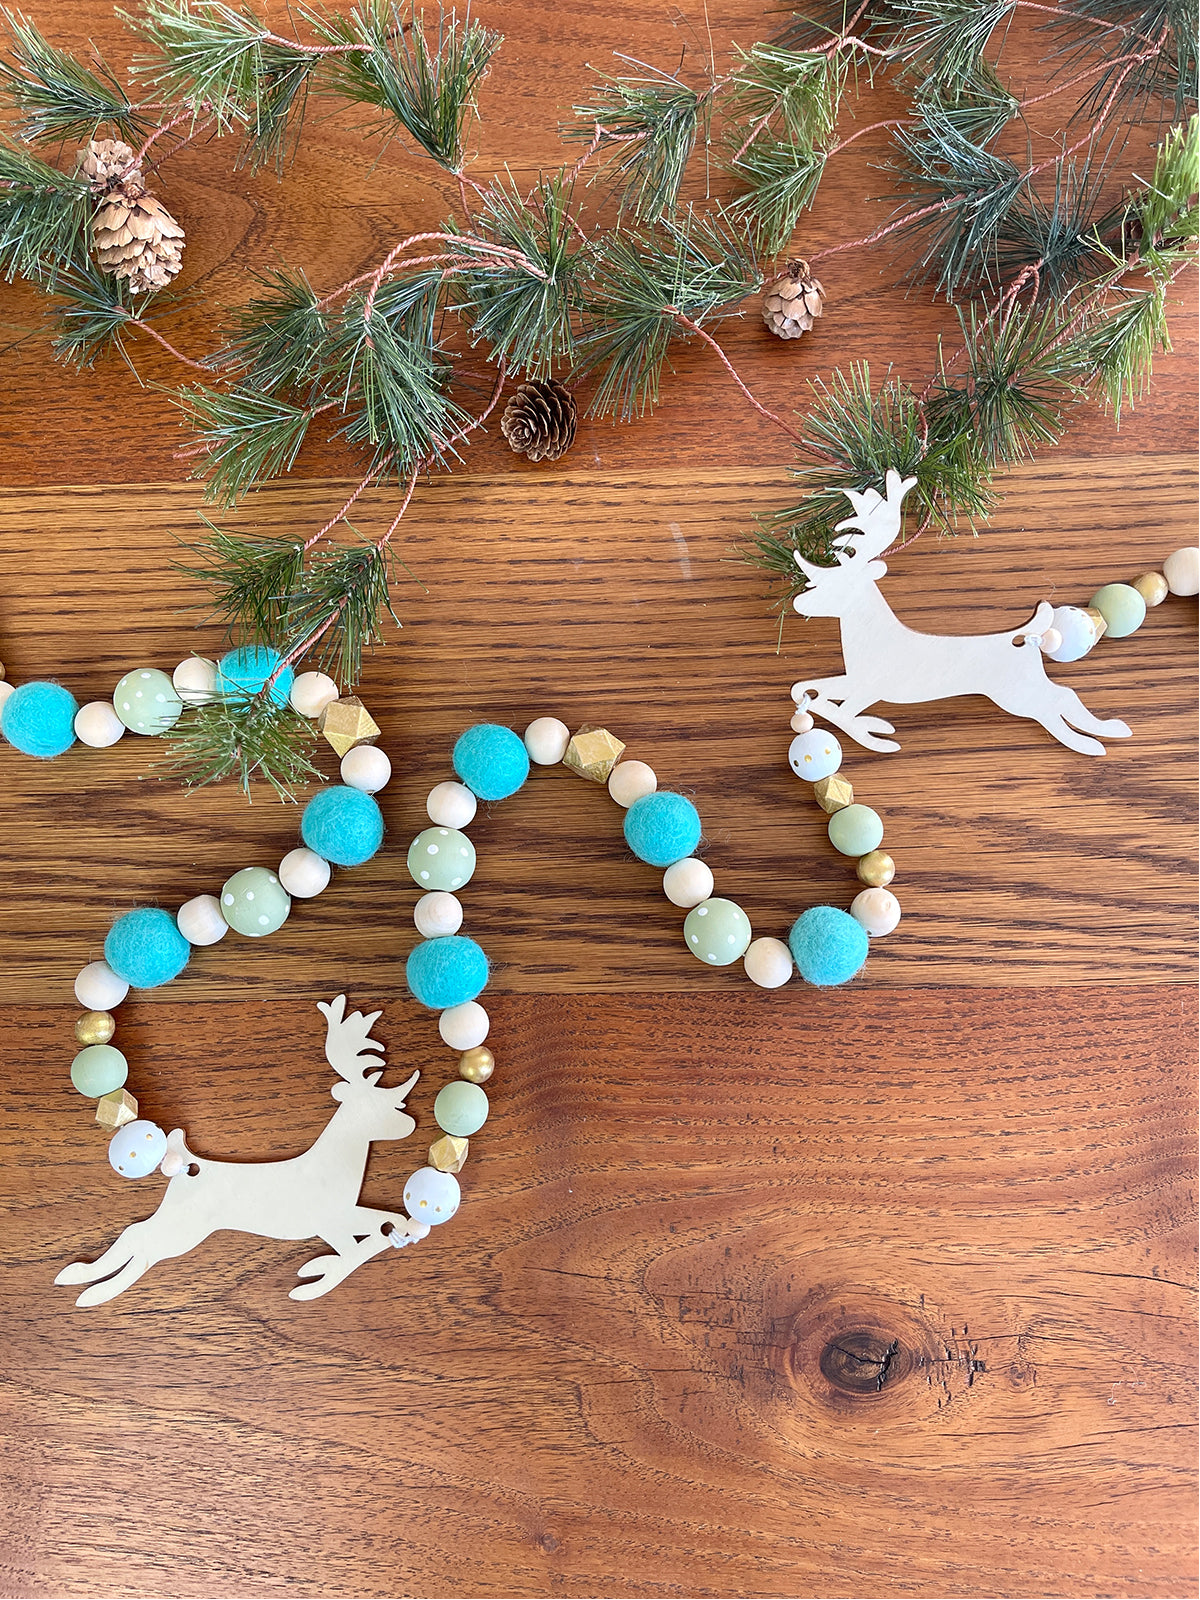  Five DIY holiday project ideas using wool felt balls by Make & Merry Co - Garland